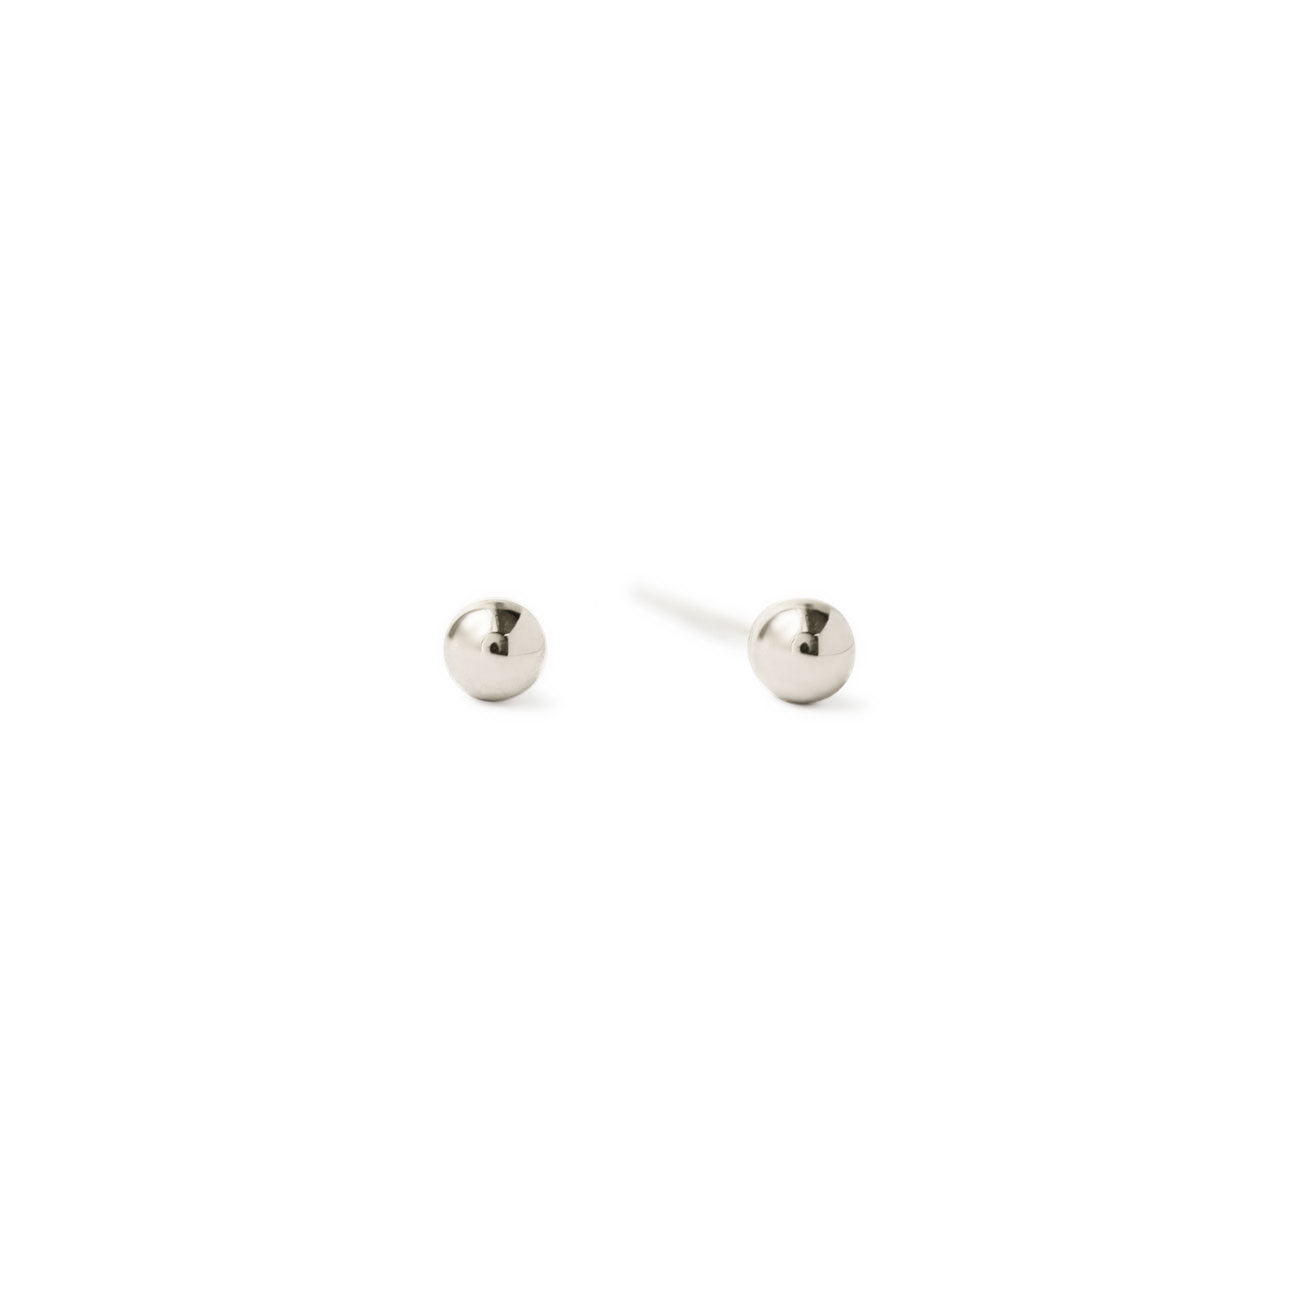 Buy Tiny Diamond Stud Earrings, Small Diamond Stud Earrings, White Diamond  Earrings, 14k Gold, Rose Gold, White Gold Studs, Simple and Minimal Online  in India - Etsy